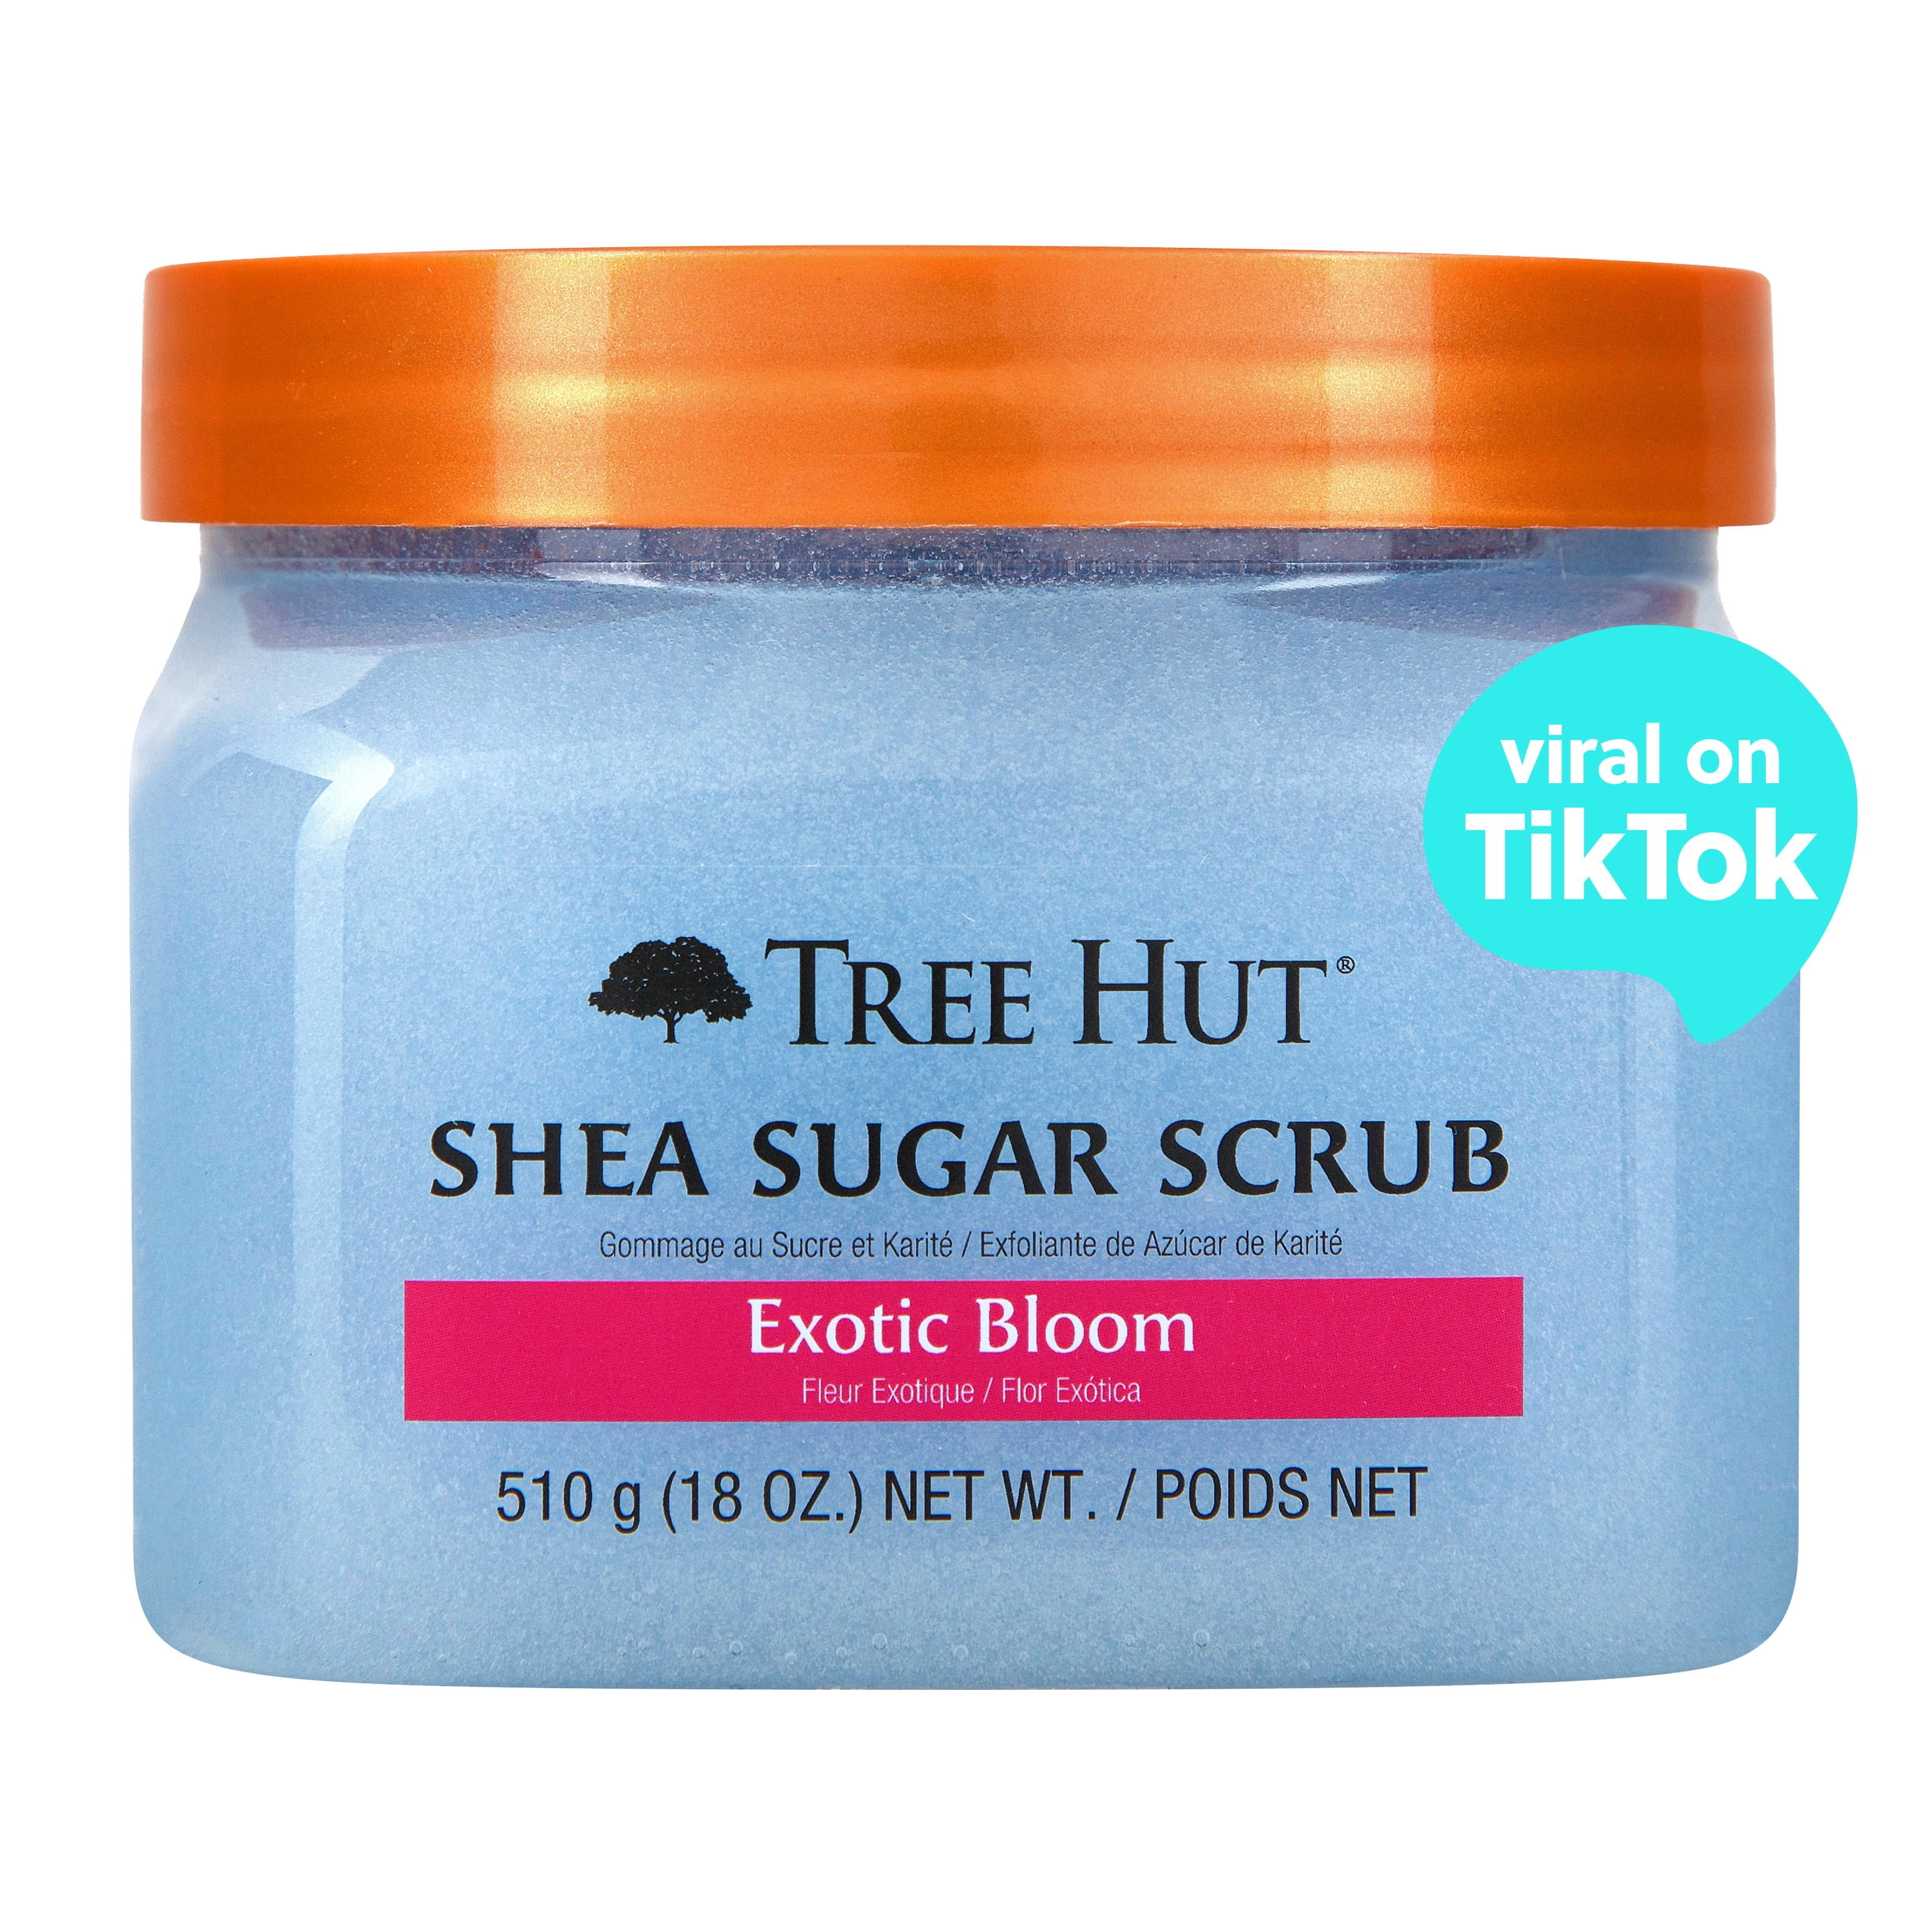 Tree Hut Shea Sugar Scrub, Belize Breeze, 18 Ounce Ingredients and Reviews